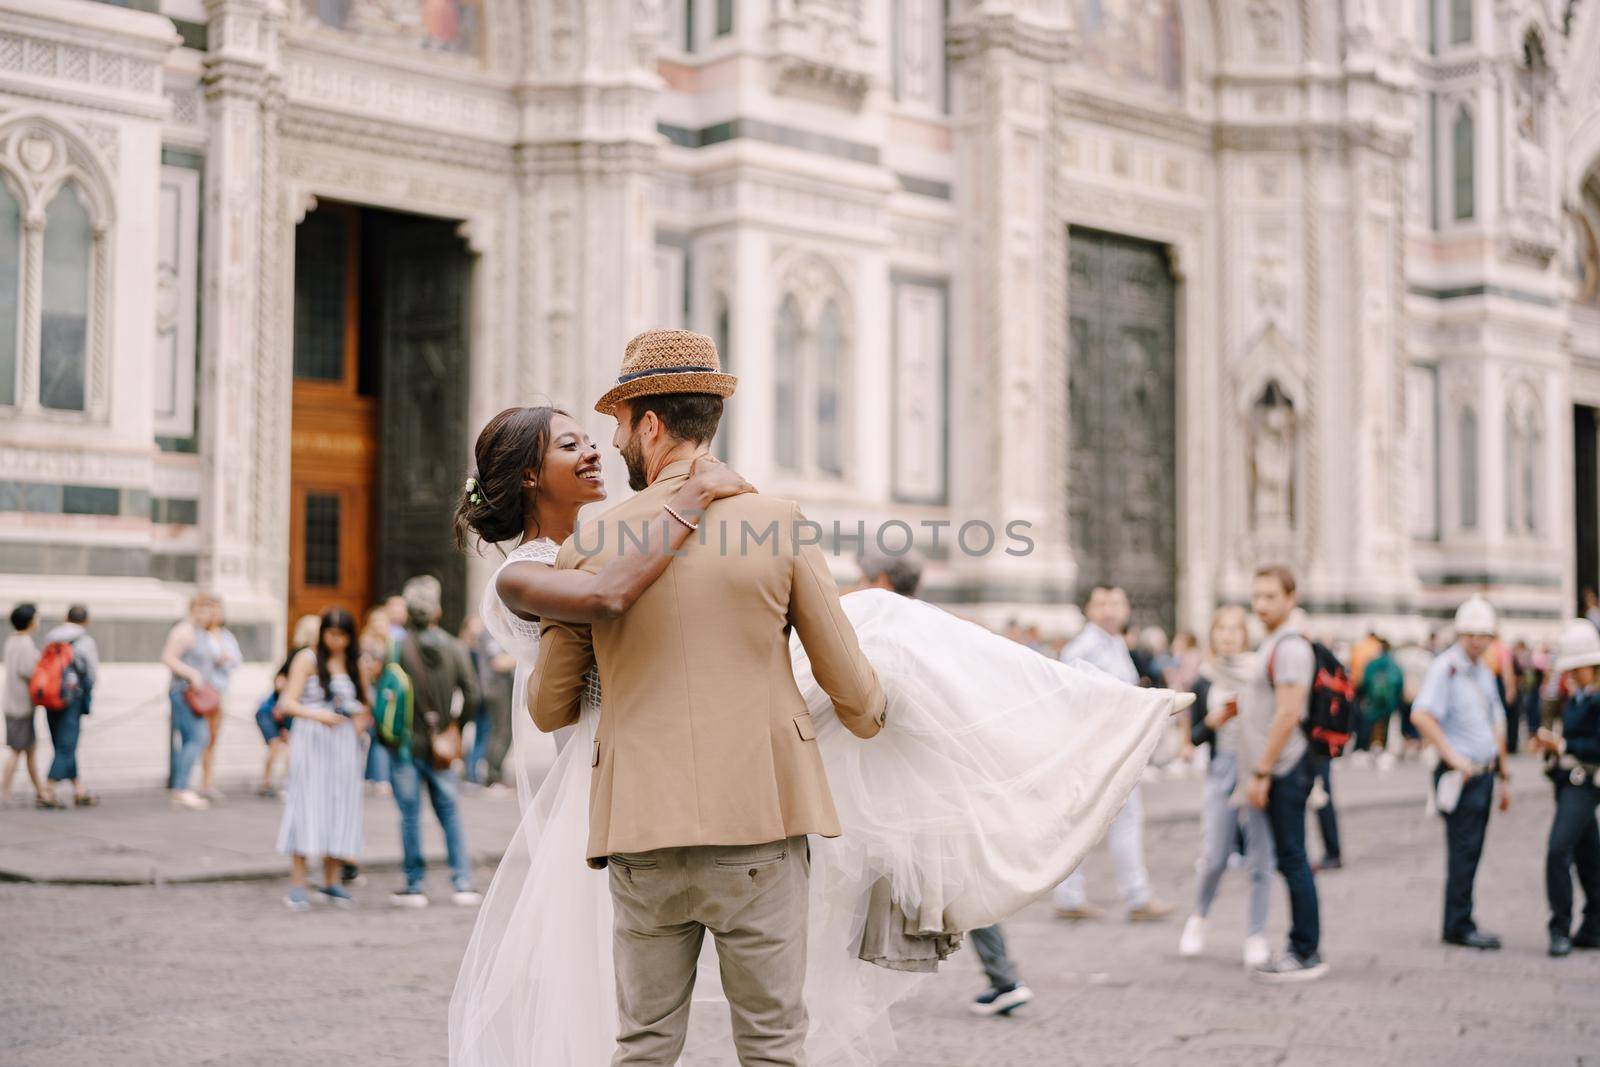 Caucasian groom circles and kisses African-American bride in Piazza del Duomo. Wedding in Florence, Italy. Mixed-race wedding couple